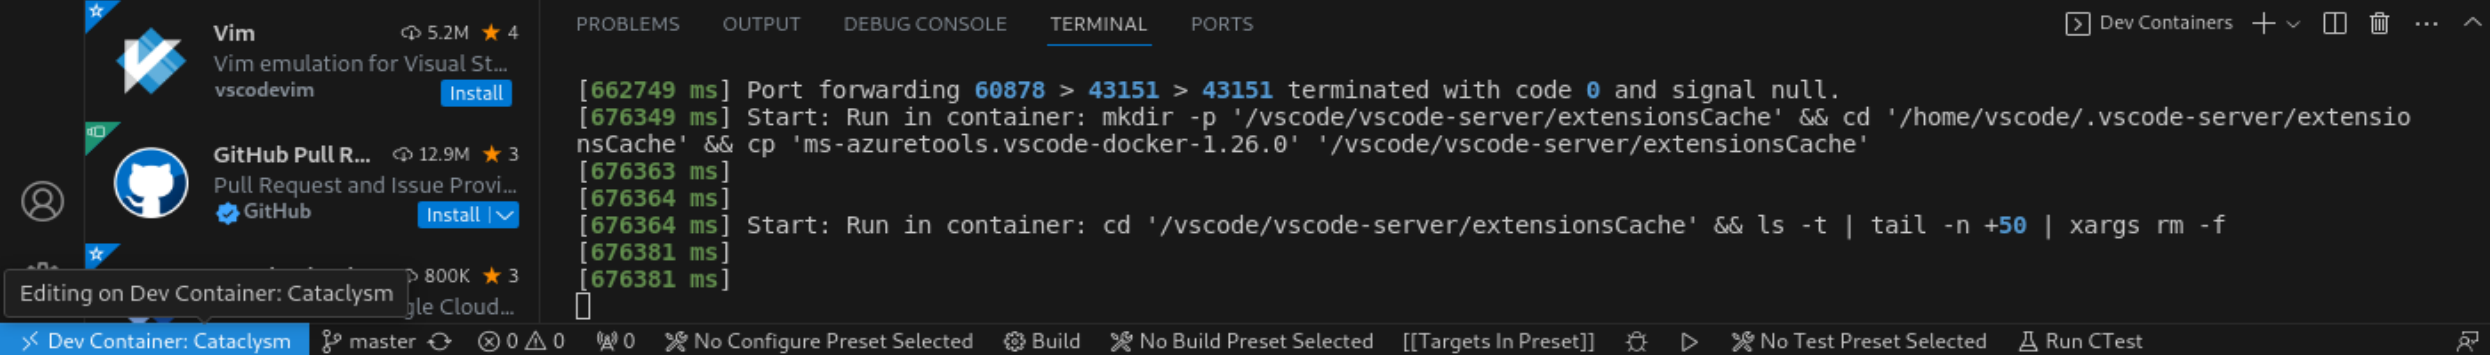 Image showing the container is running in vscode